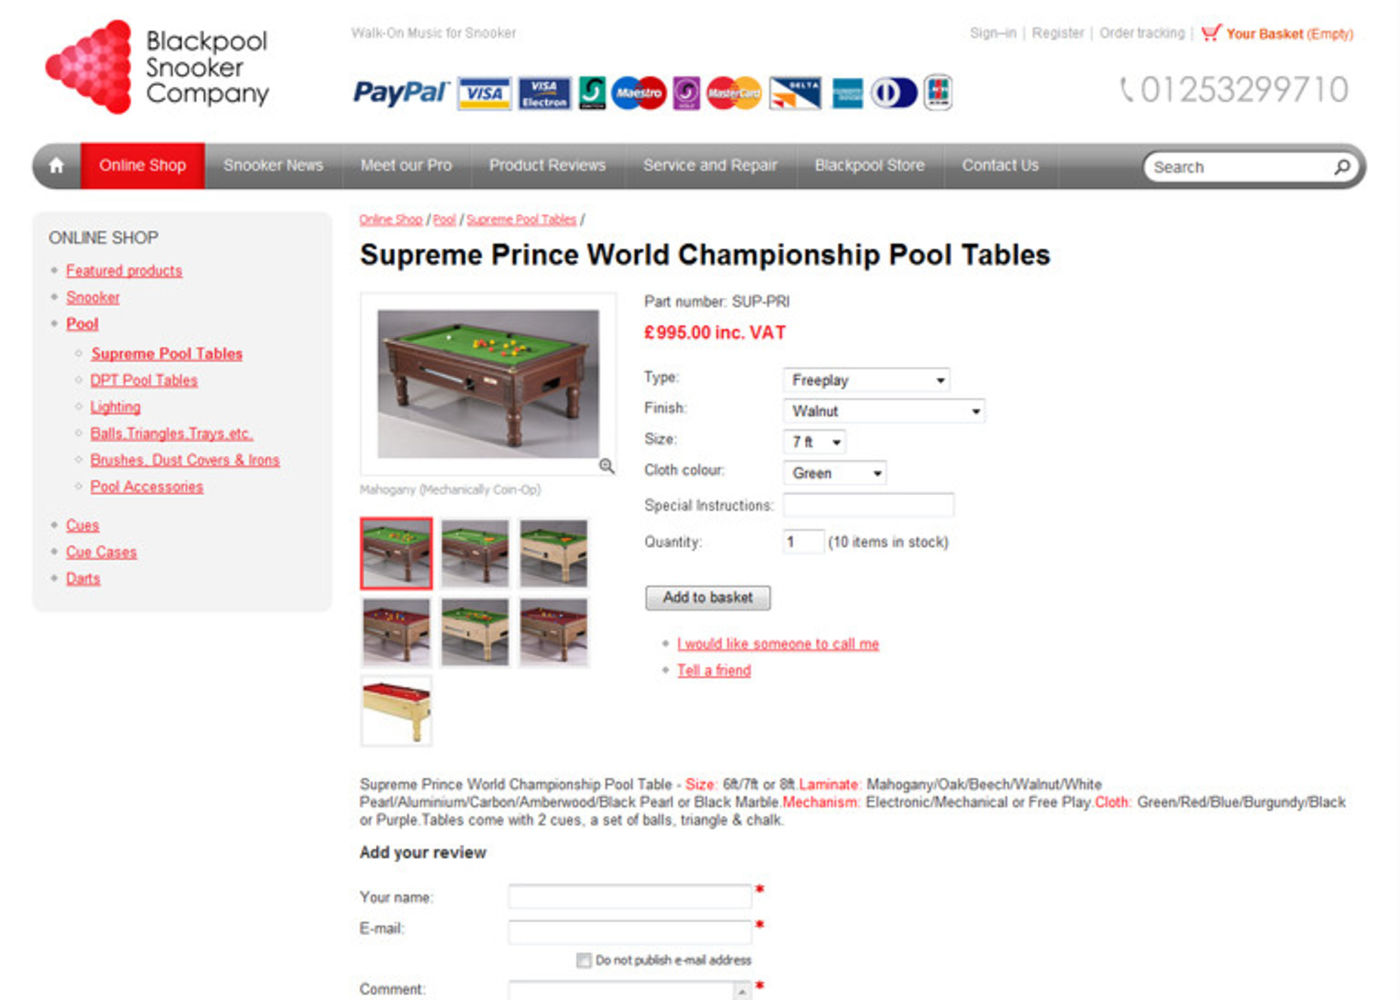 Blackpool Snooker Shop Online Product